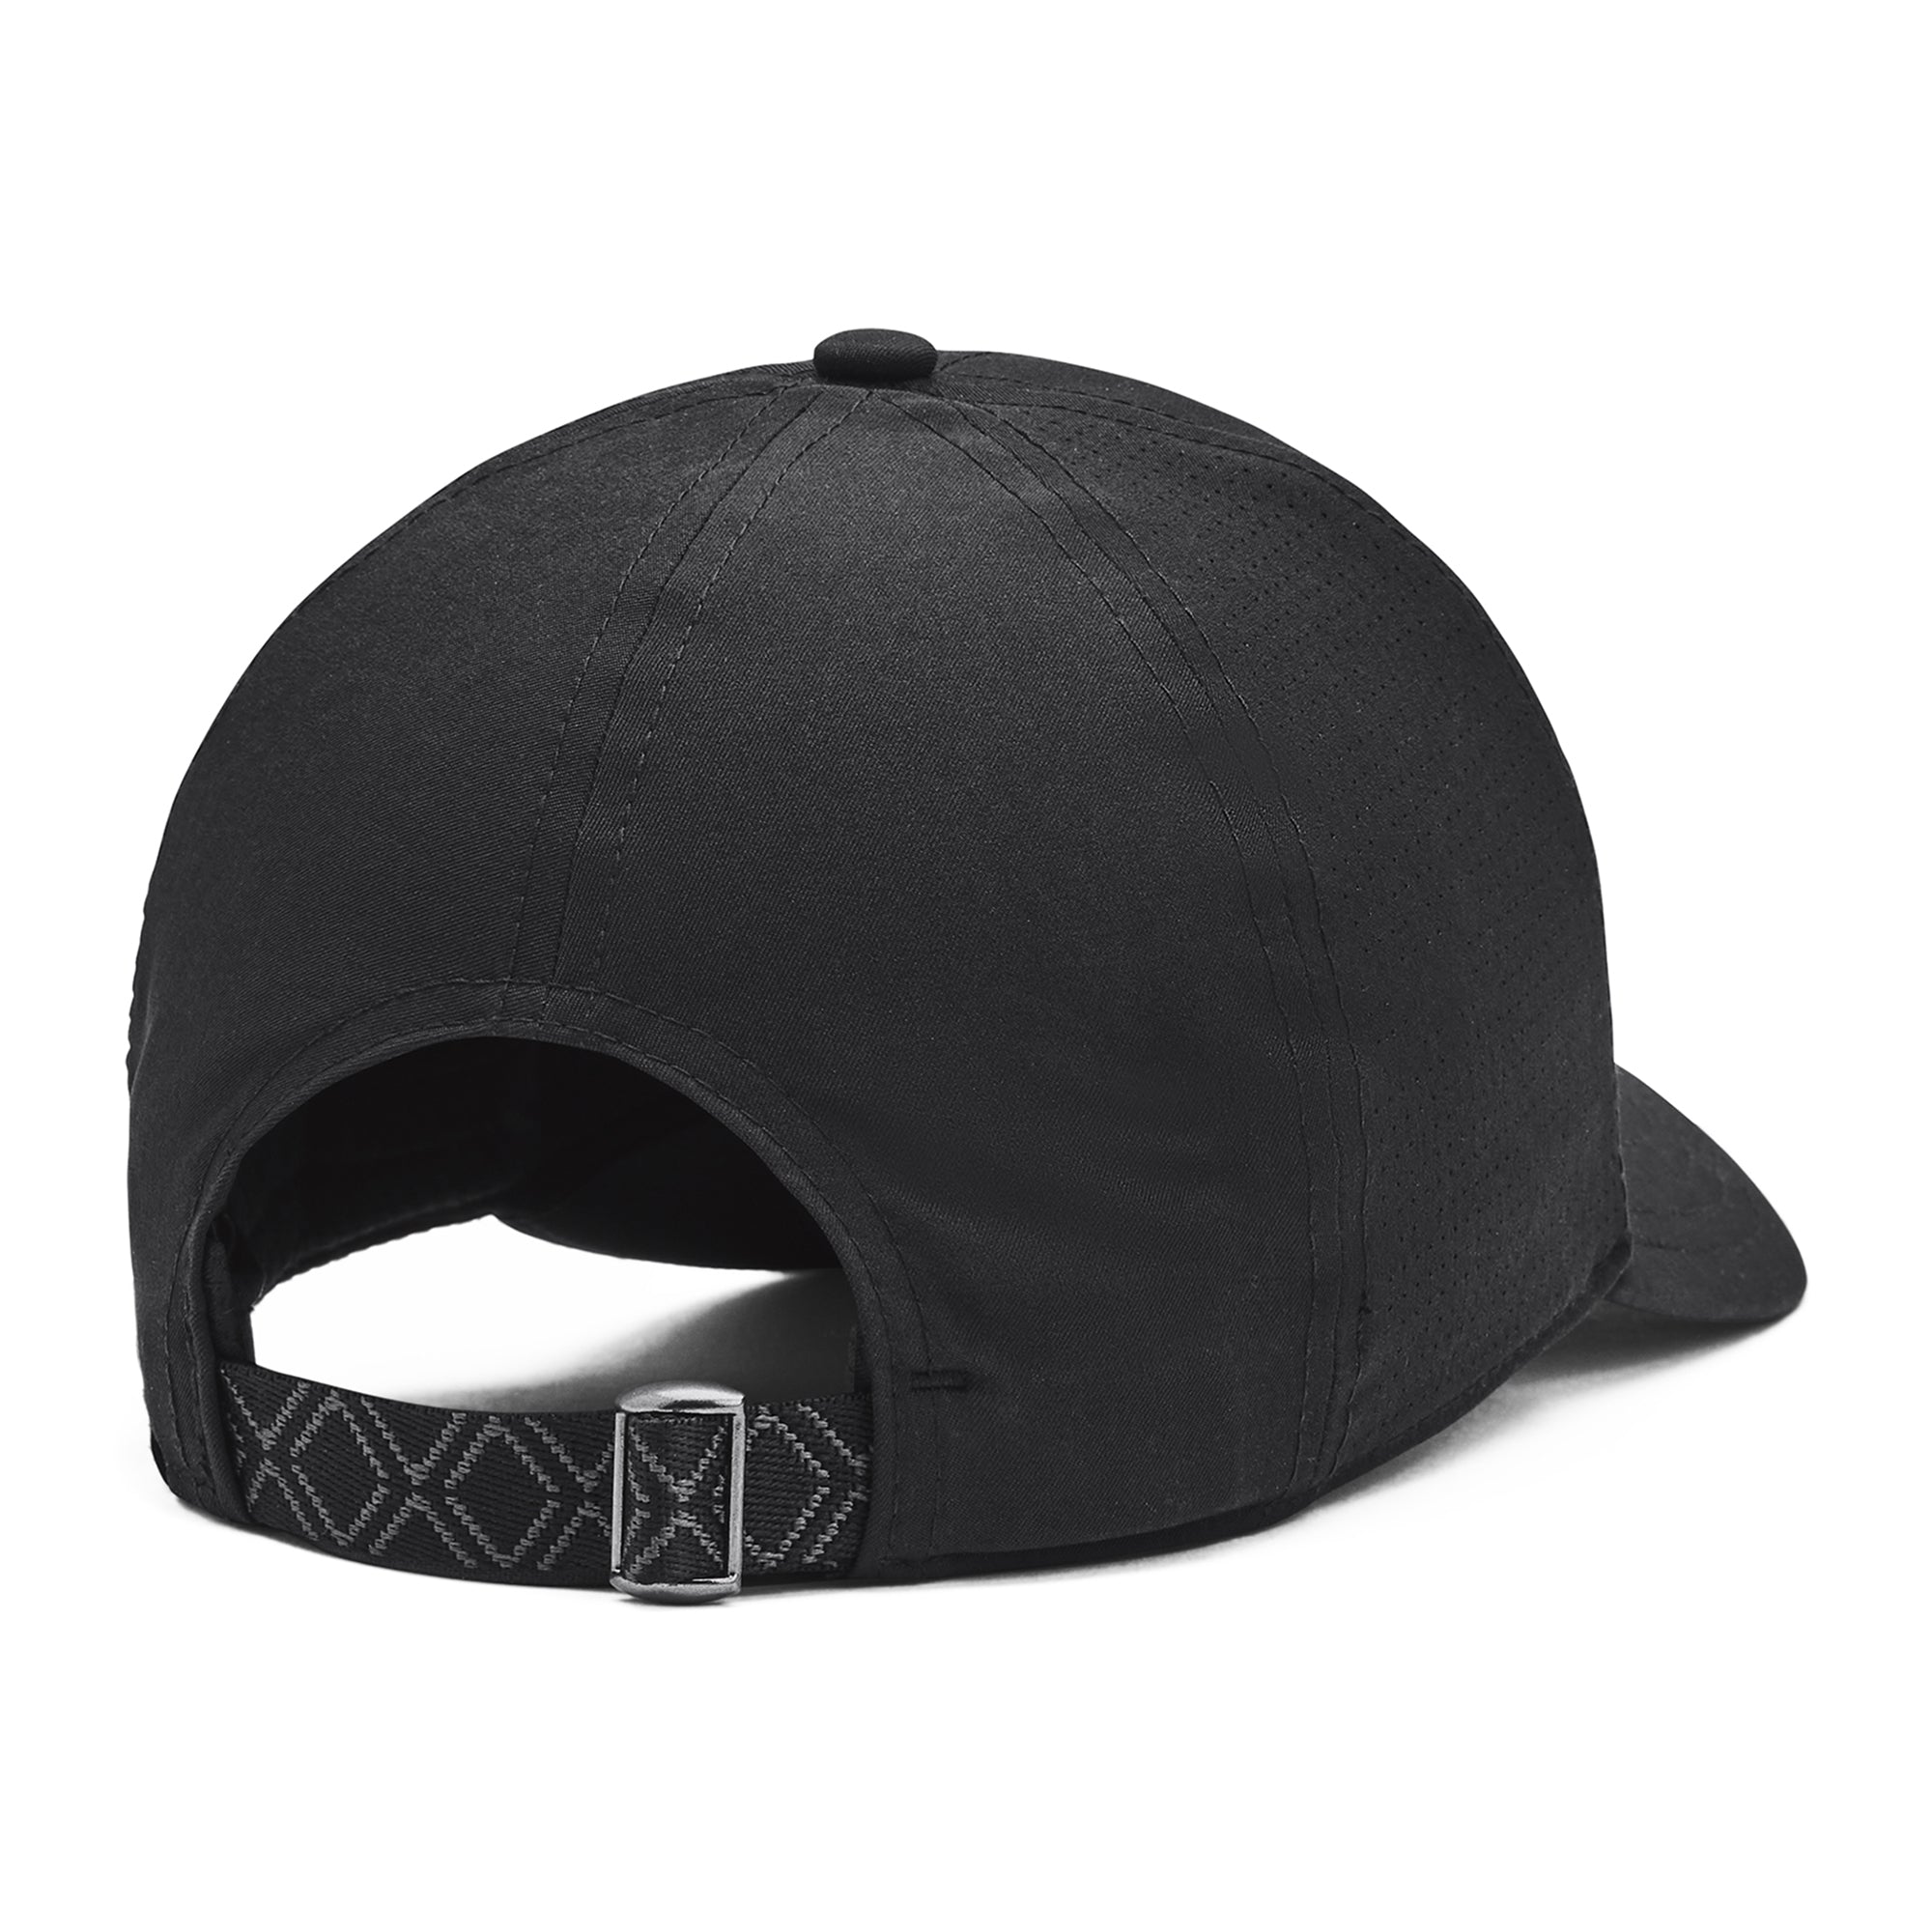 Under Armour Golf Iso-Chill Curry Adj Cap 1369803 Black 002 & Function18